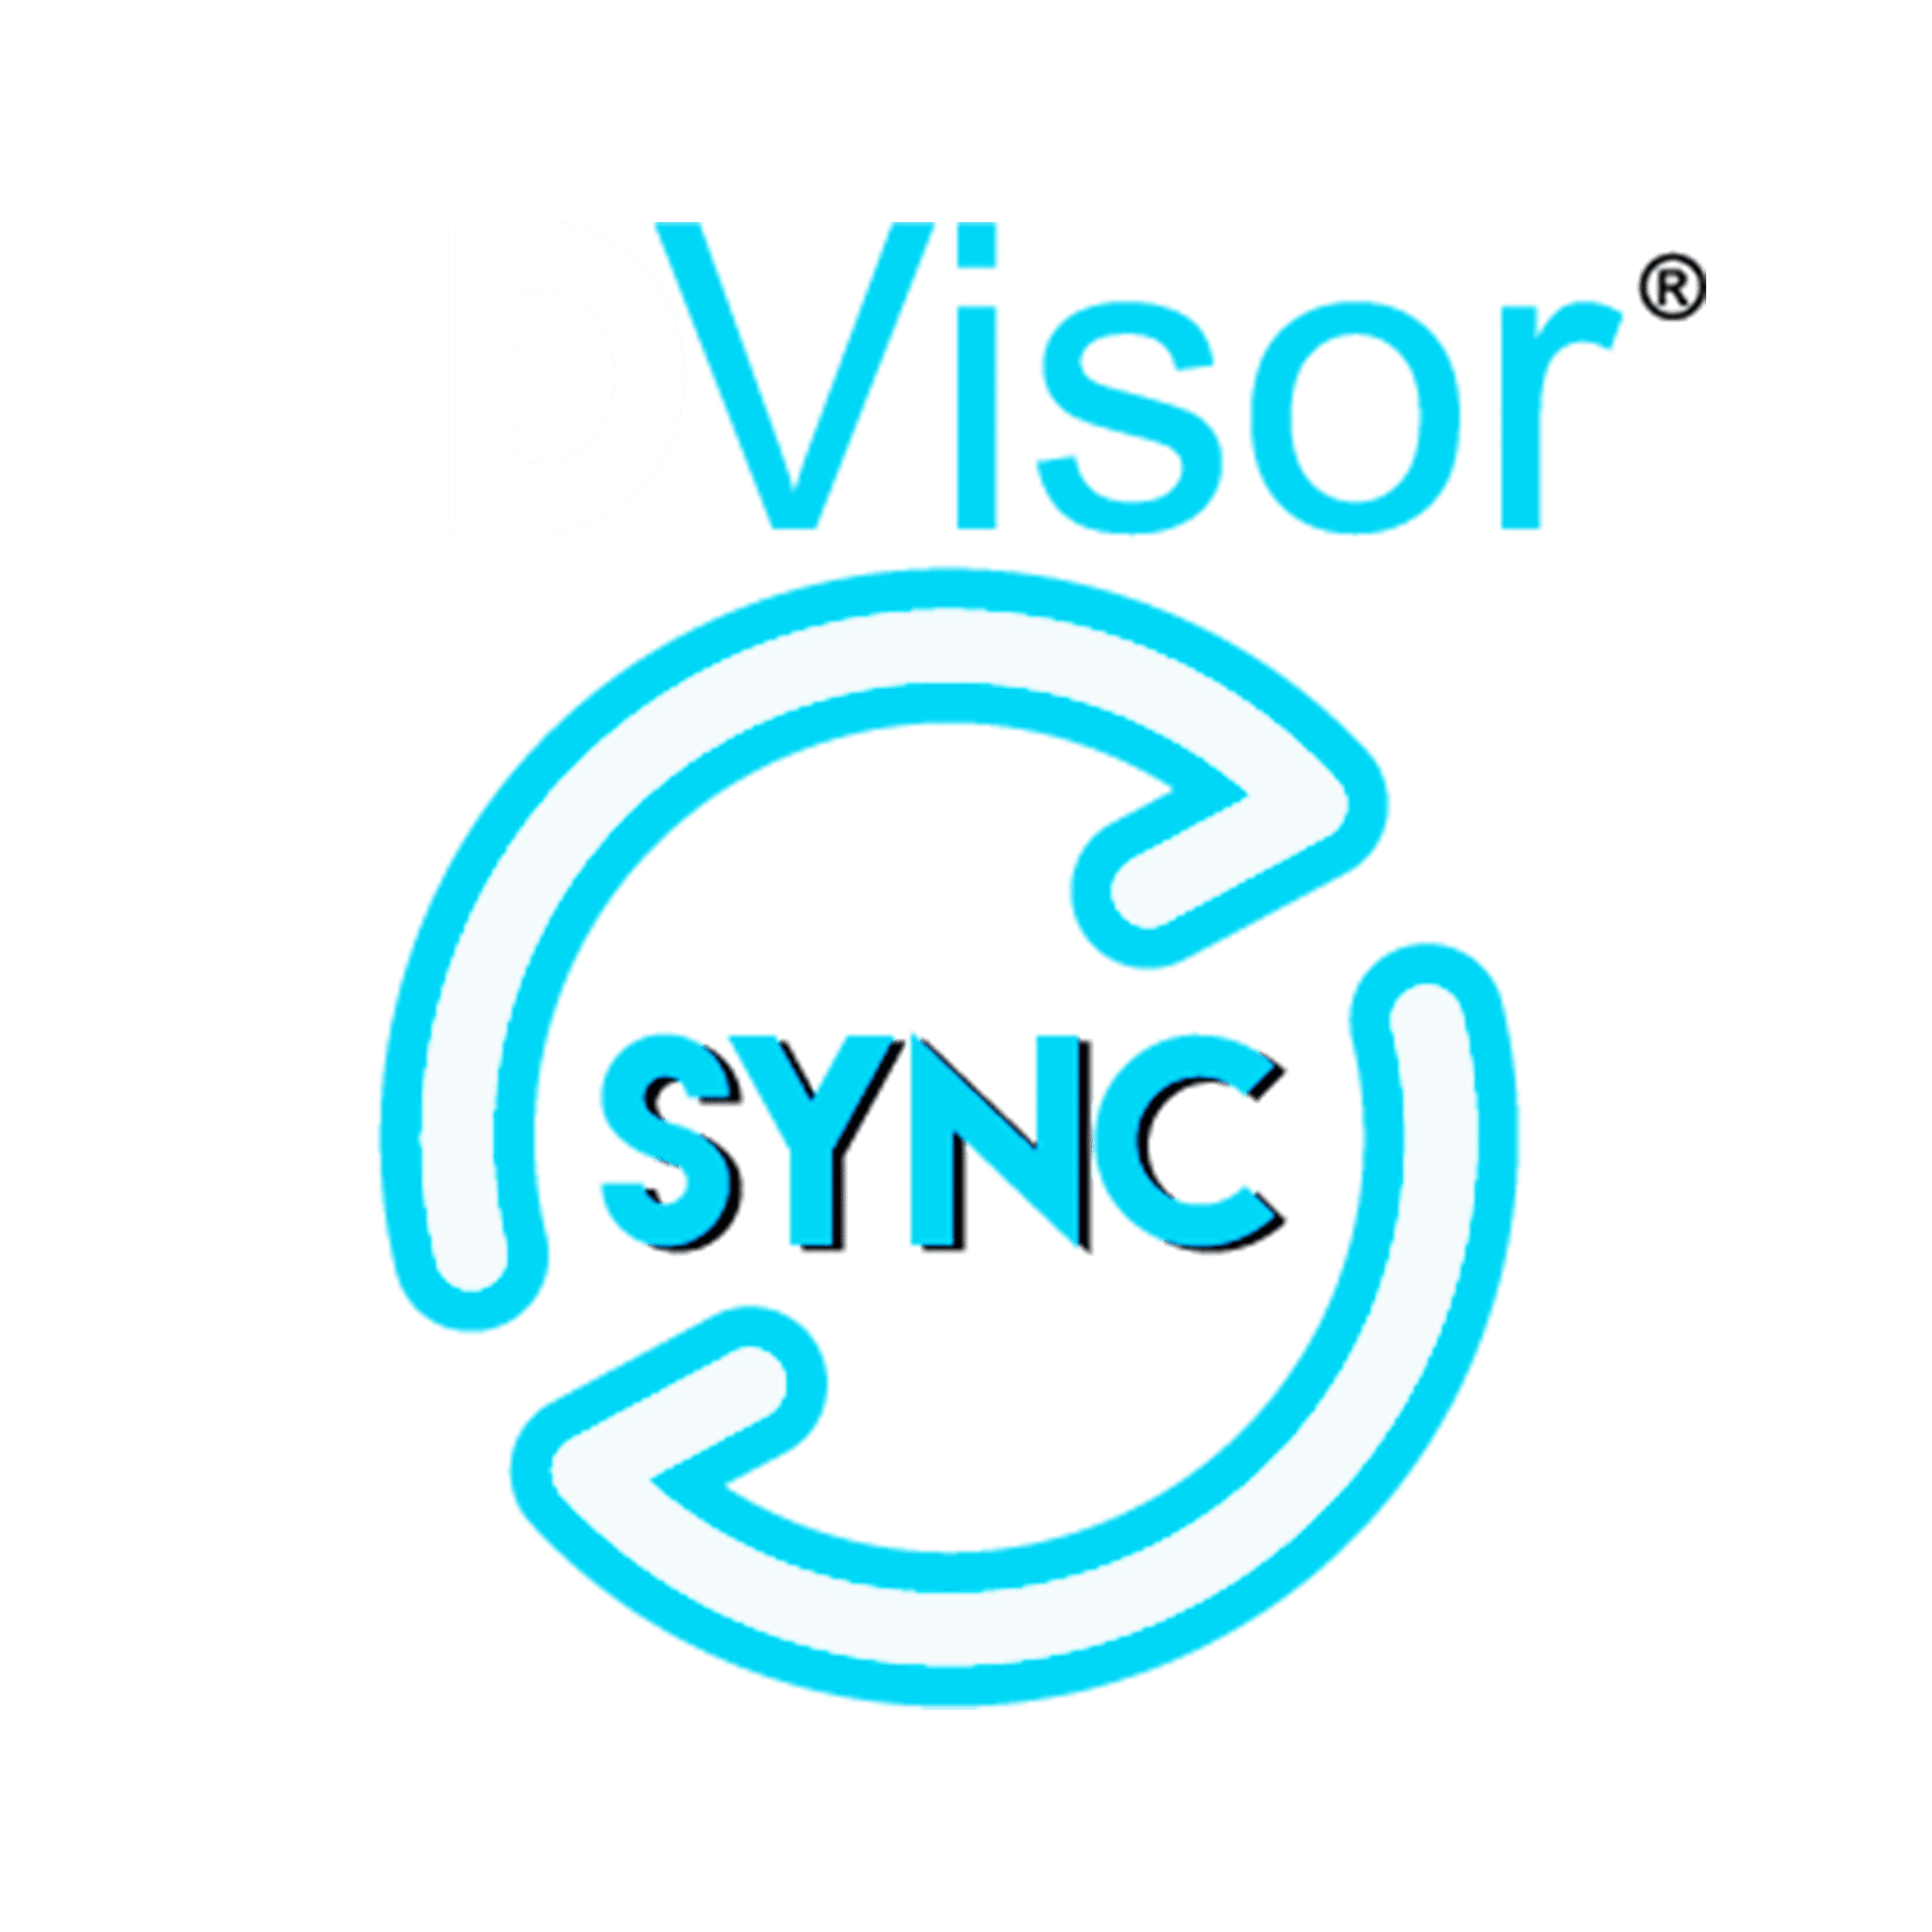 IDVisor Sync logo in light blue with white ID text - nightlife public safety tool